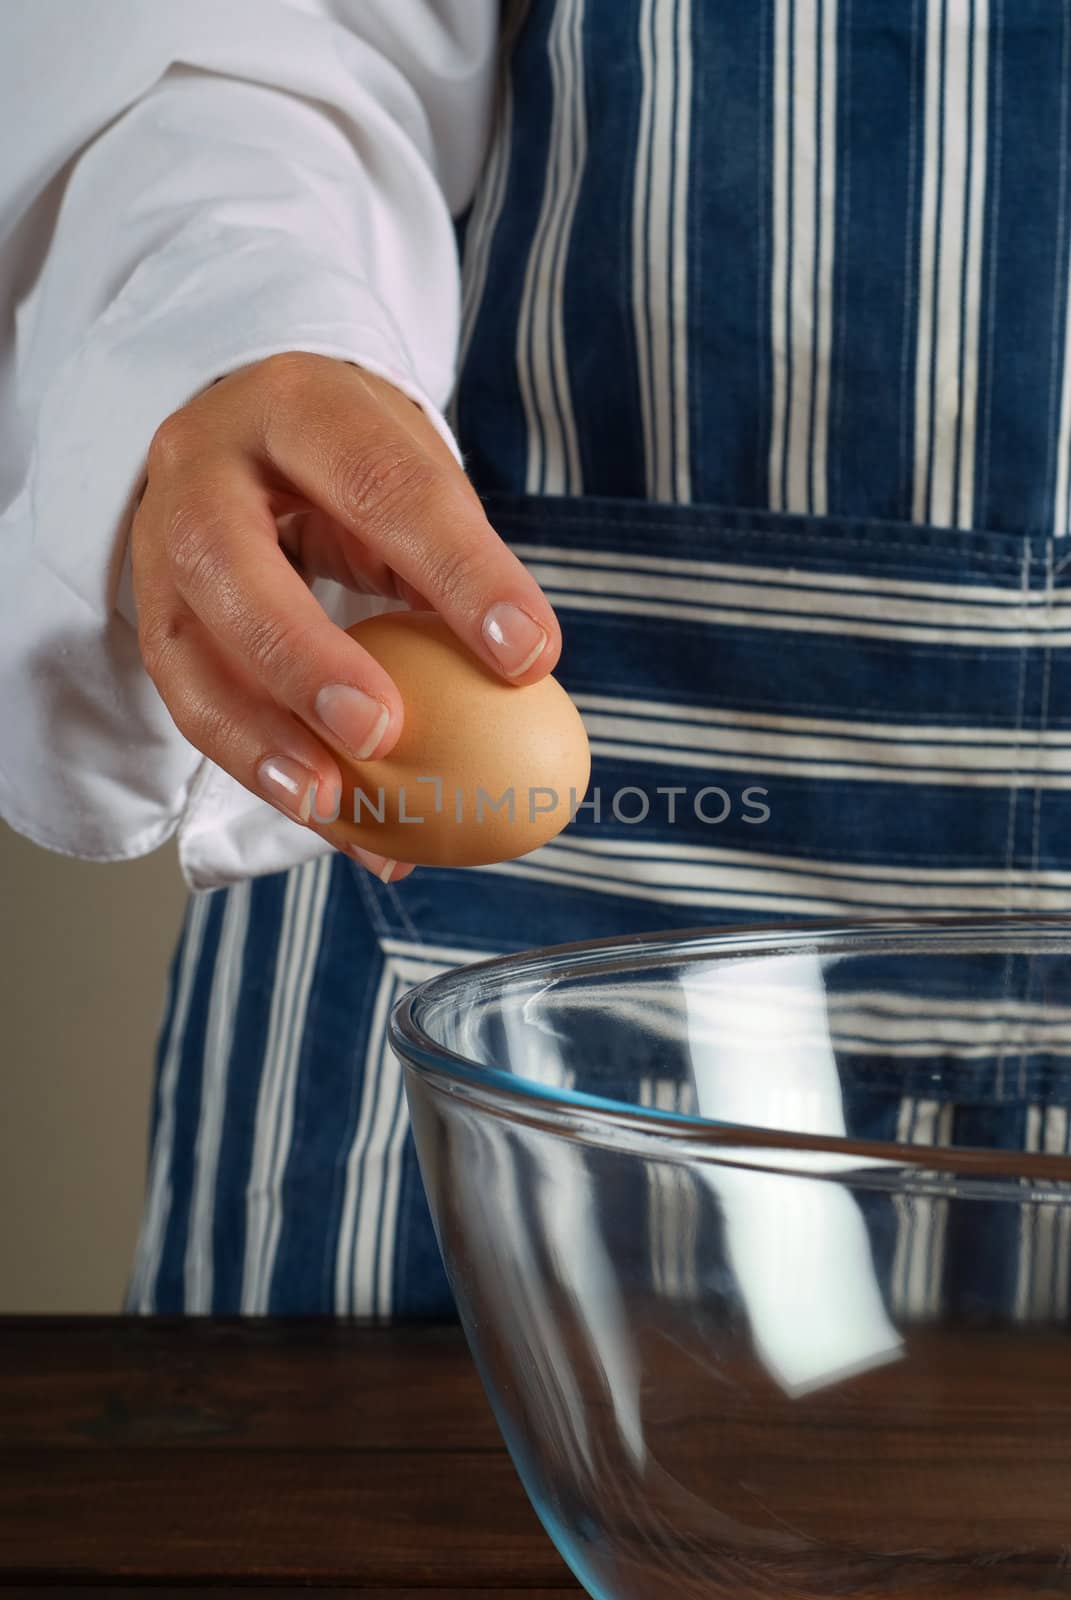 Woman chef or cook breaking egg into kitchen mixing bowl